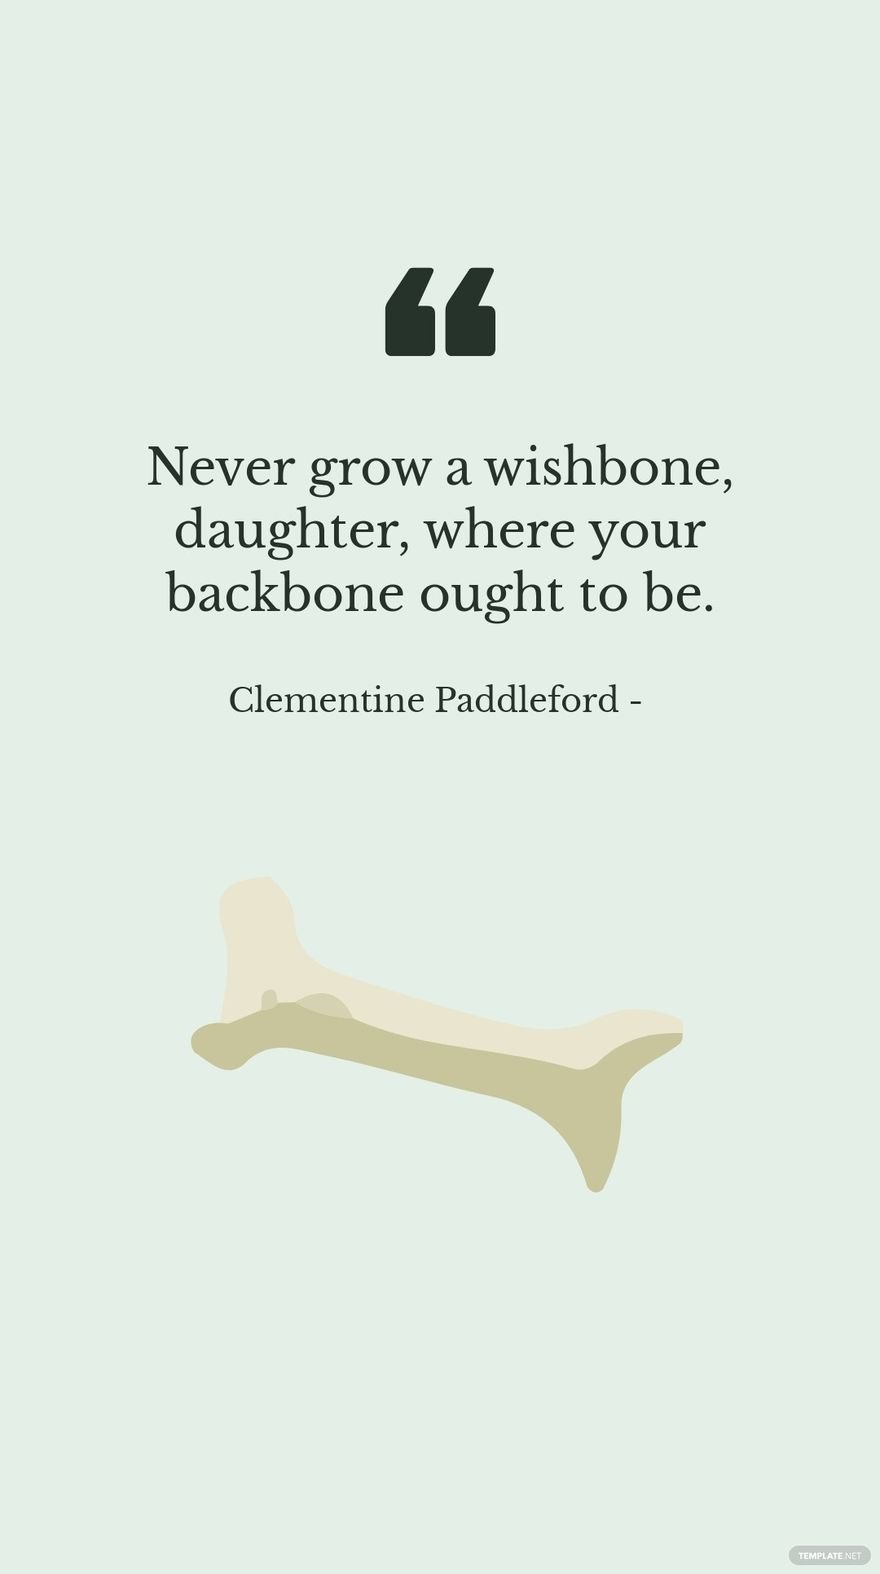 Free Clementine Paddleford - Never grow a wishbone, daughter, where your backbone ought to be. in JPG